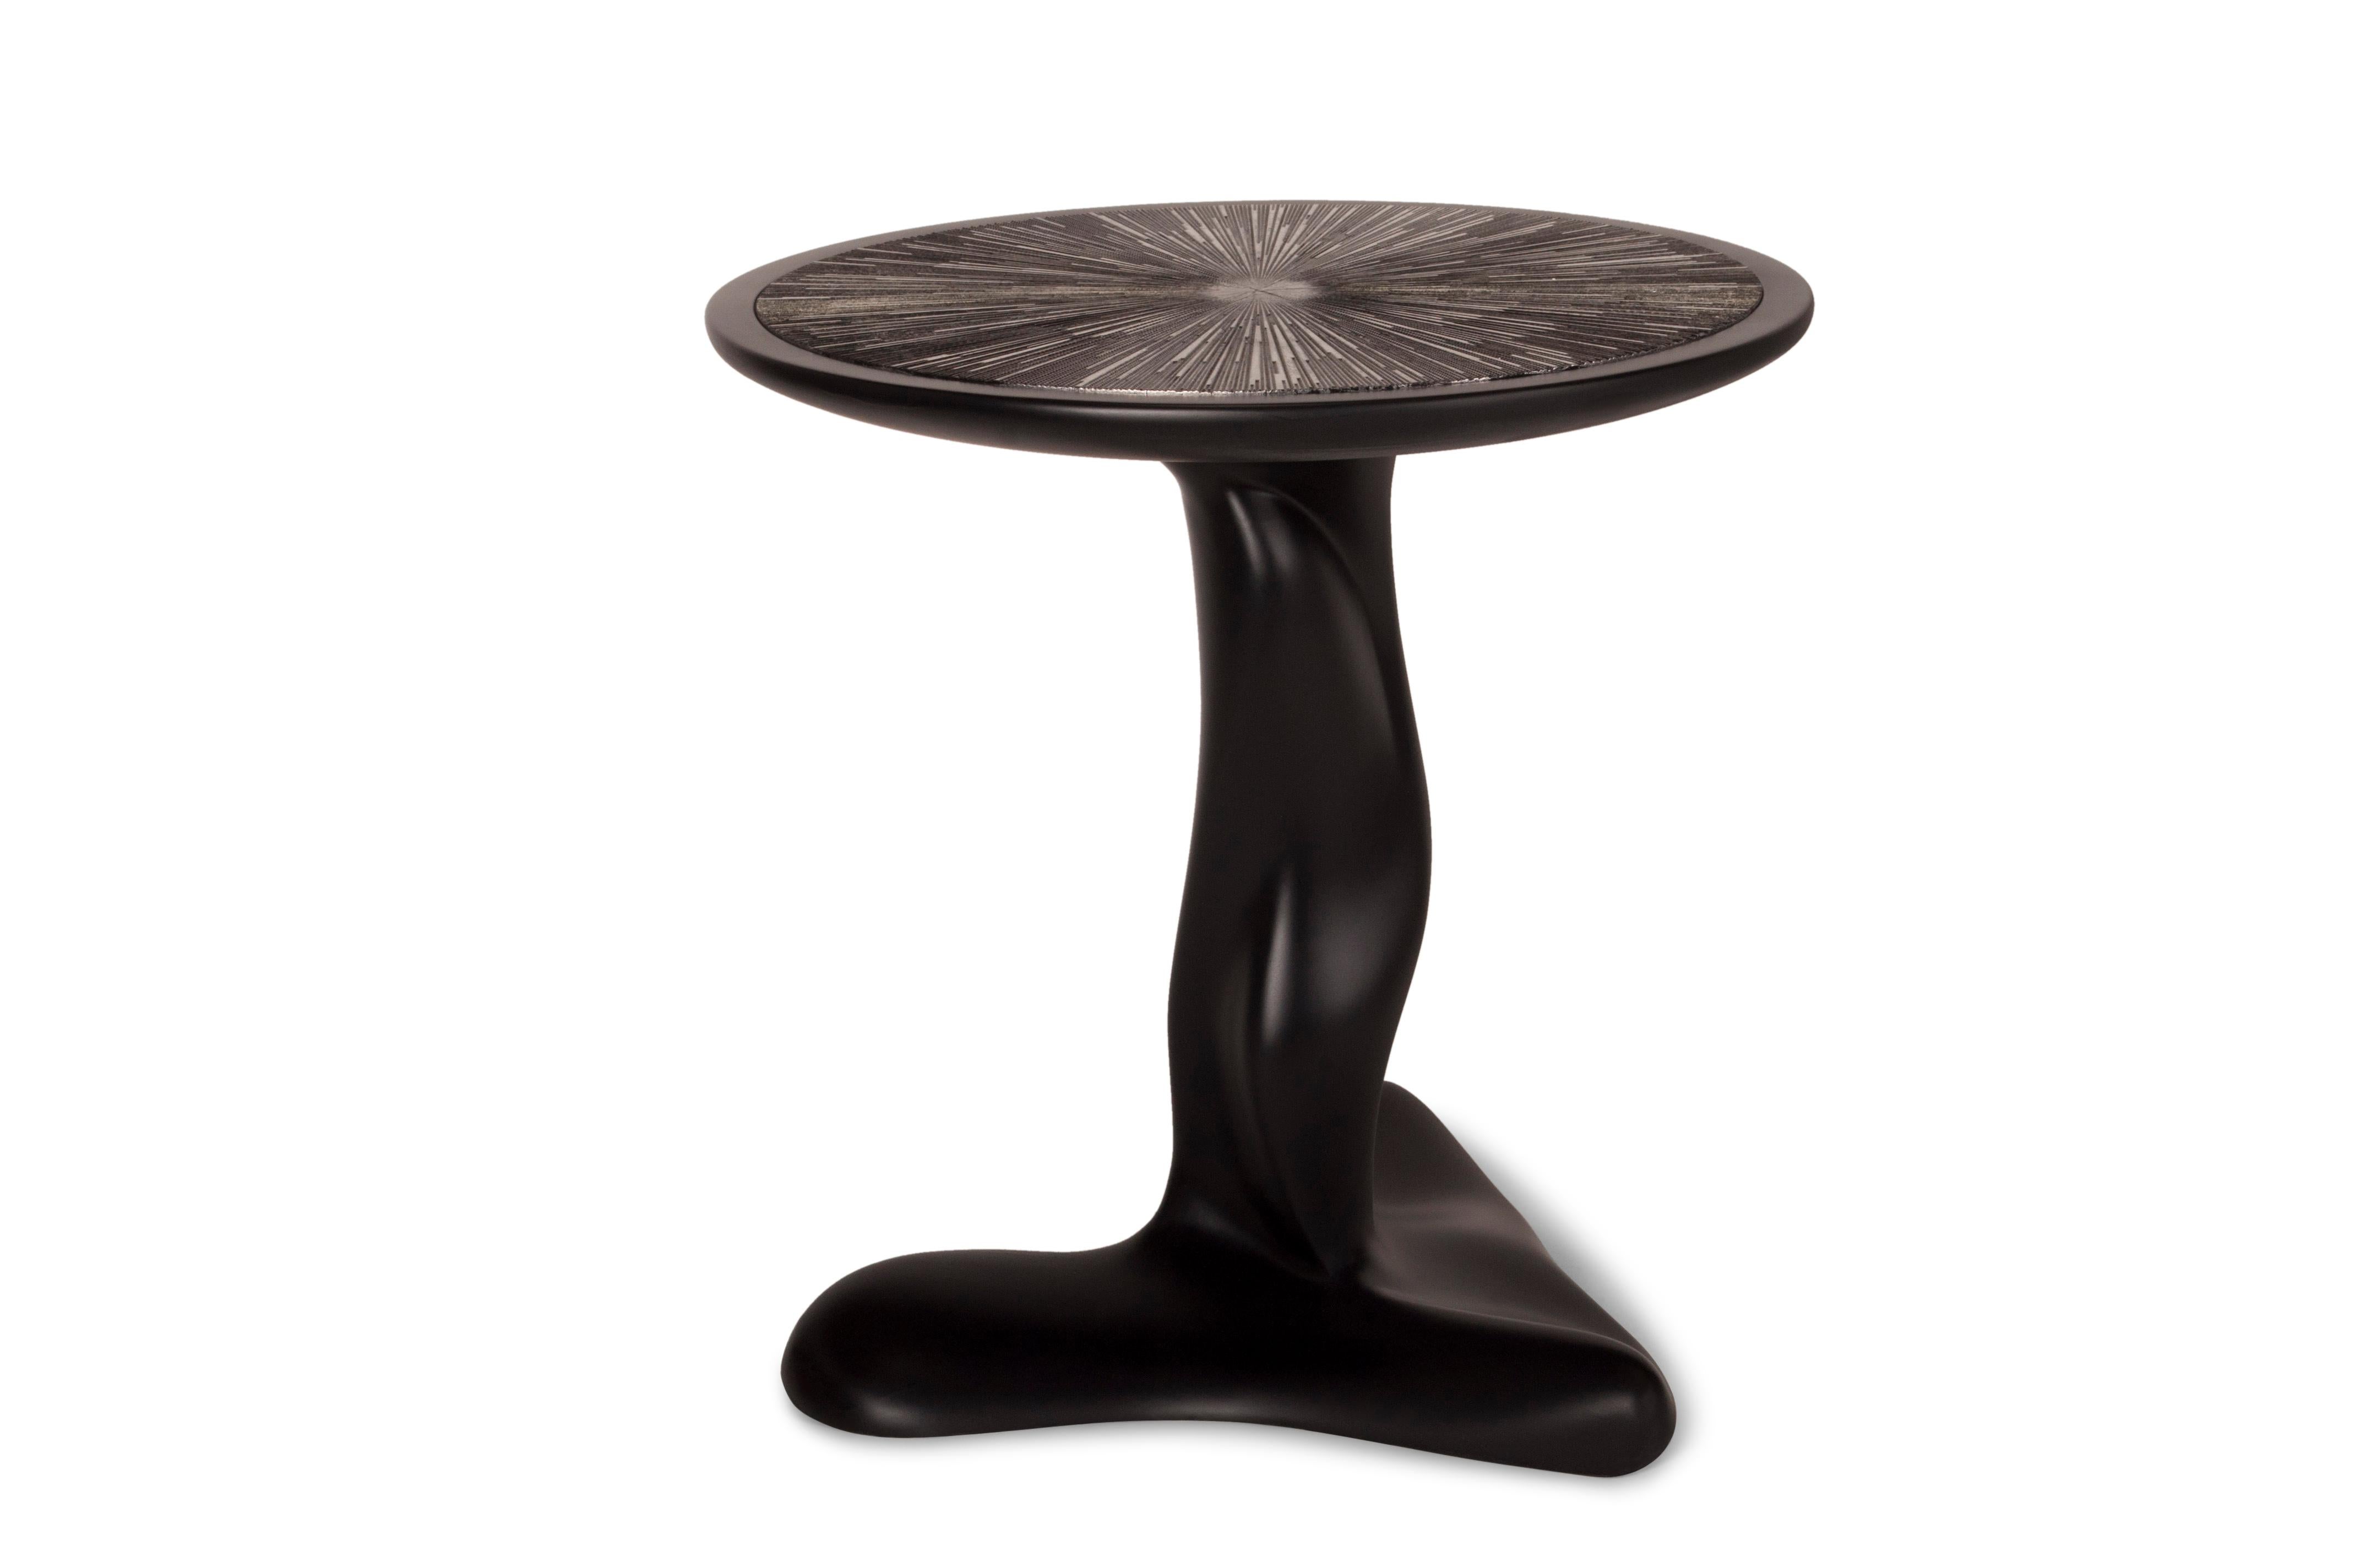 Helios side table is finished black matte lacquer. The top is lacquered black with silver leaves gilding. Custom finish and sized available.

About Amorph: 
Amorph is a design and manufacturing company based in Los Angeles, California. We take pride